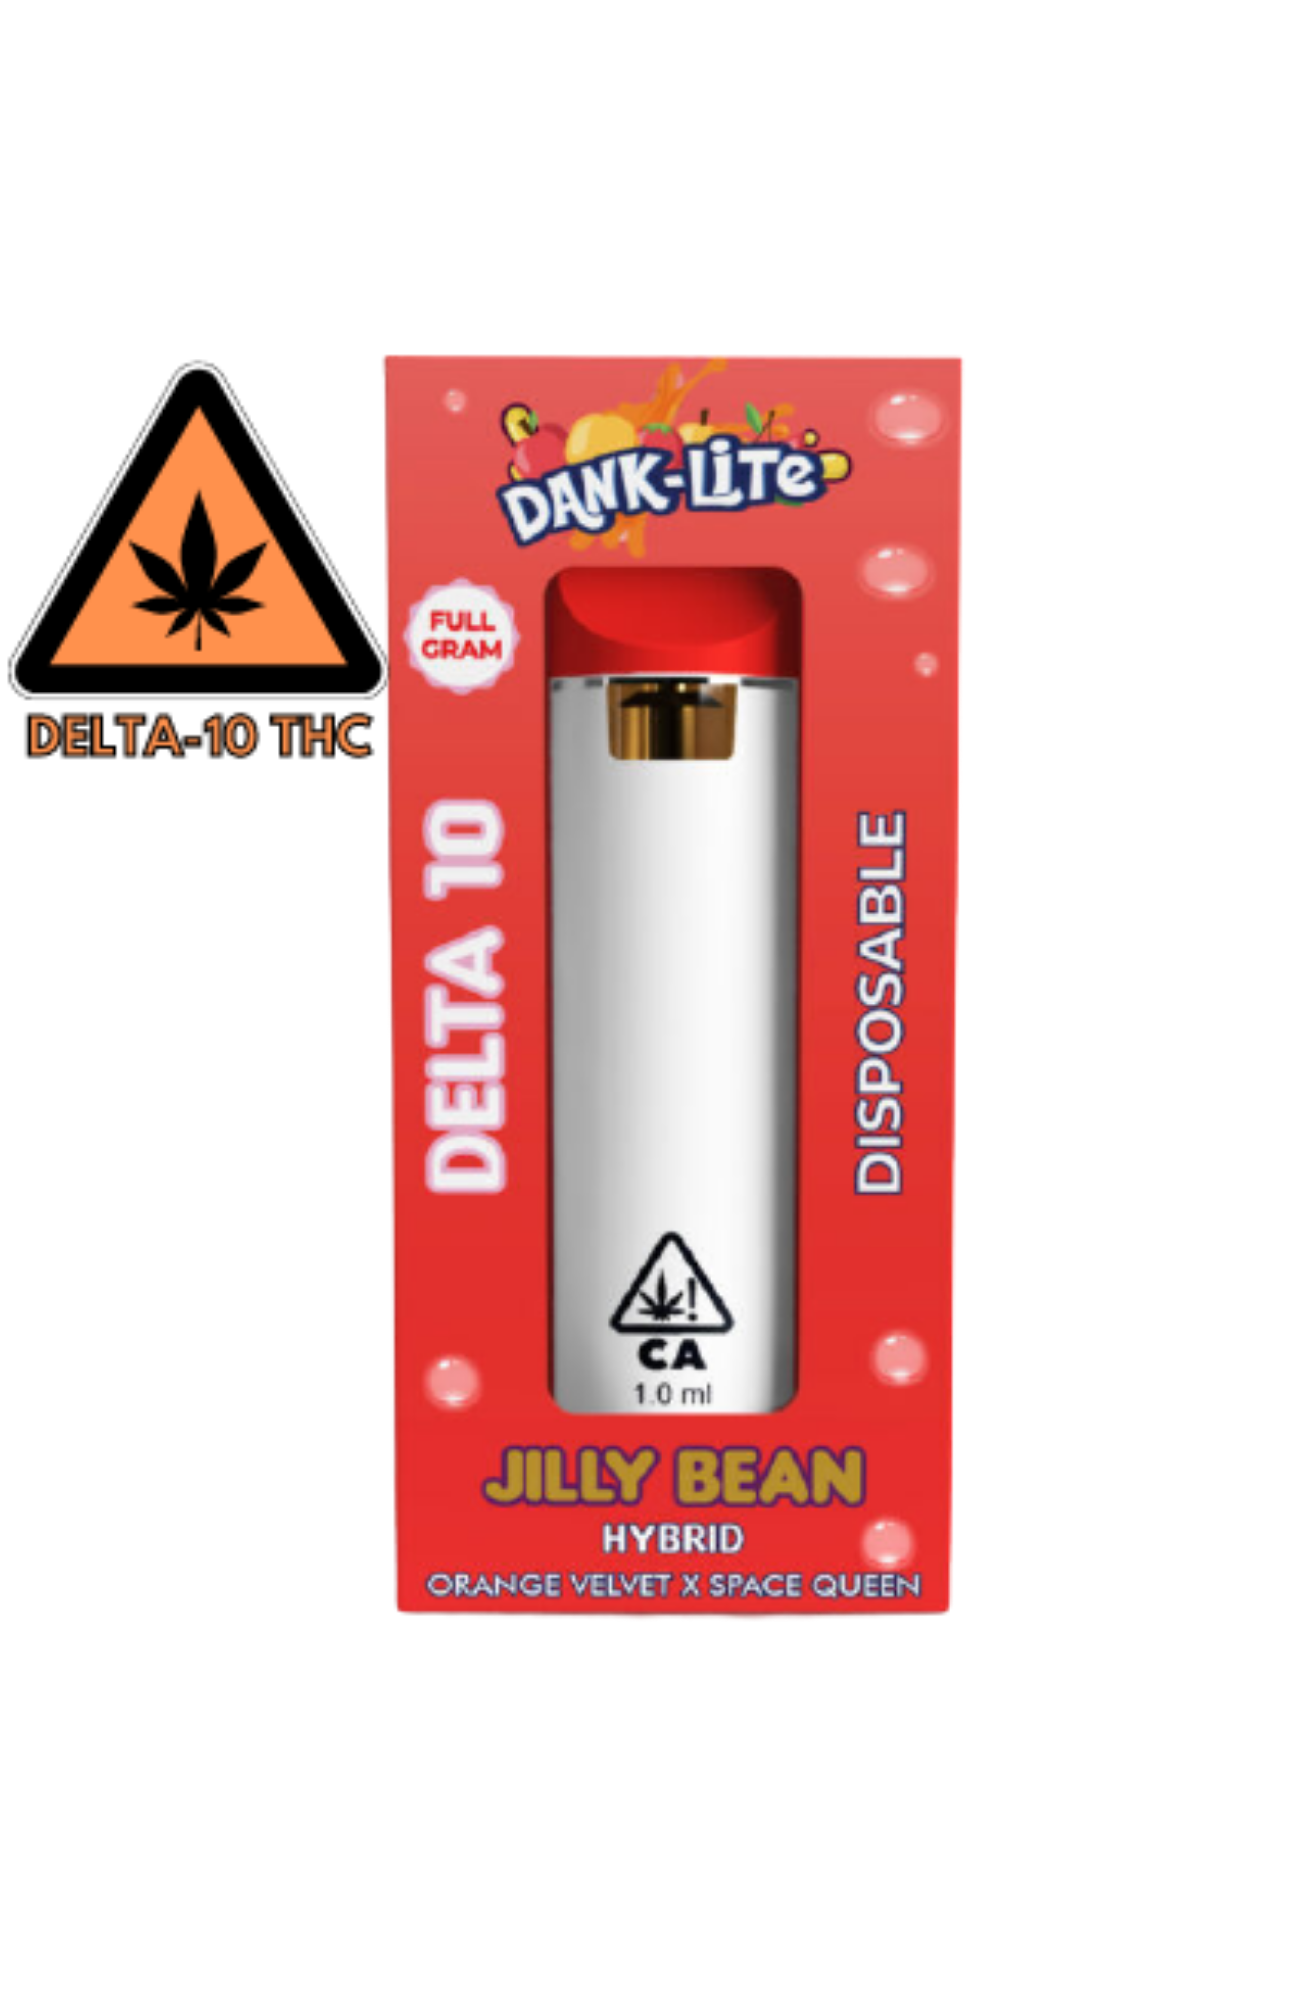 What Is Delta 10 Carts - Thc|Delta|Products|Delta-10|Effects|Cbd|Cannabis|Cannabinoids|Cannabinoid|Hemp|Oil|Body|Benefits|Pain|Drug|Inflammation|People|Receptors|Gummies|Arthritis|Market|Product|Marijuana|Delta-8|Research|States|Cb1|Test|Strains|Effect|Vape|Experience|Users|Time|Compound|System|Way|Anxiety|Plants|Chemical|Delta-10 Thc|Delta-9 Thc|Cbd Oil|Drug Test|Delta-10 Products|Side Effects|Delta-8 Thc|Cb1 Receptors|Cb2 Receptors|Cannabis Plants|Endocannabinoid System|Minor Discomfort|Medical Marijuana|Thc Products|Psychoactive Effects|Arthritic Symptoms|New Cannabinoid|Fusion Farms|Arthritic Patients|Conclusion Delta|Medical Cannabis Oil|Arthritis Pain|Good Fit|Double Bond|Anticonvulsant Actions|Medical Benefit|Anticonvulsant Properties|Epileptic Children|User Guide|Farm Bill